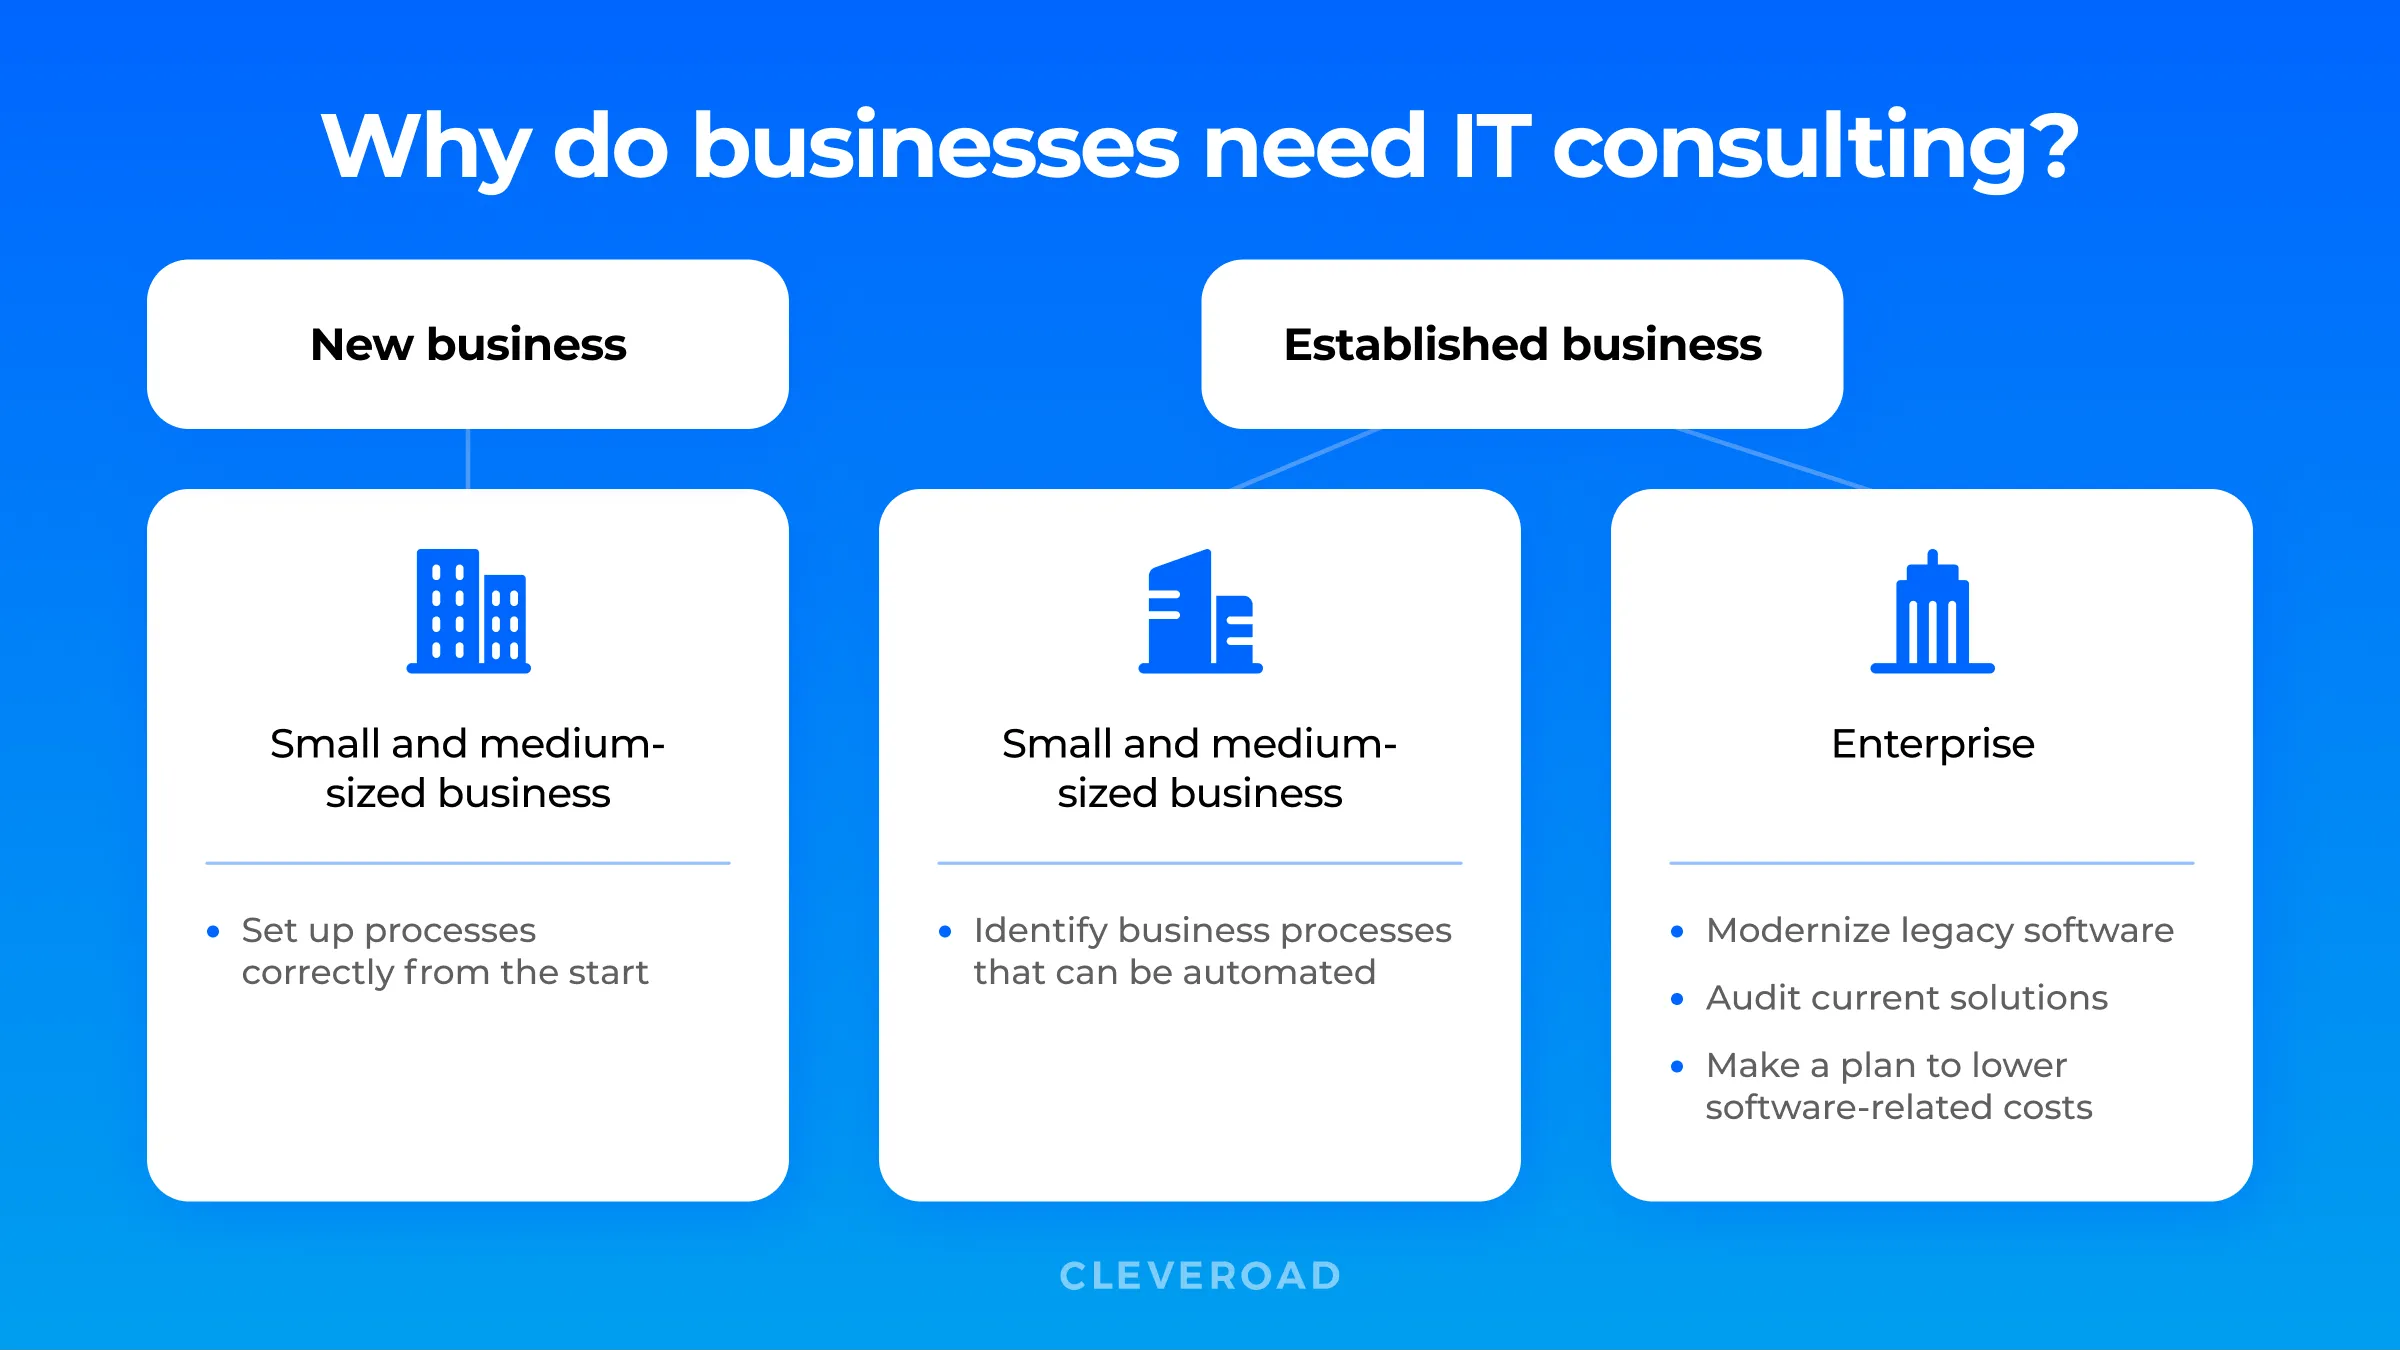 Why does your company need IT consulting?